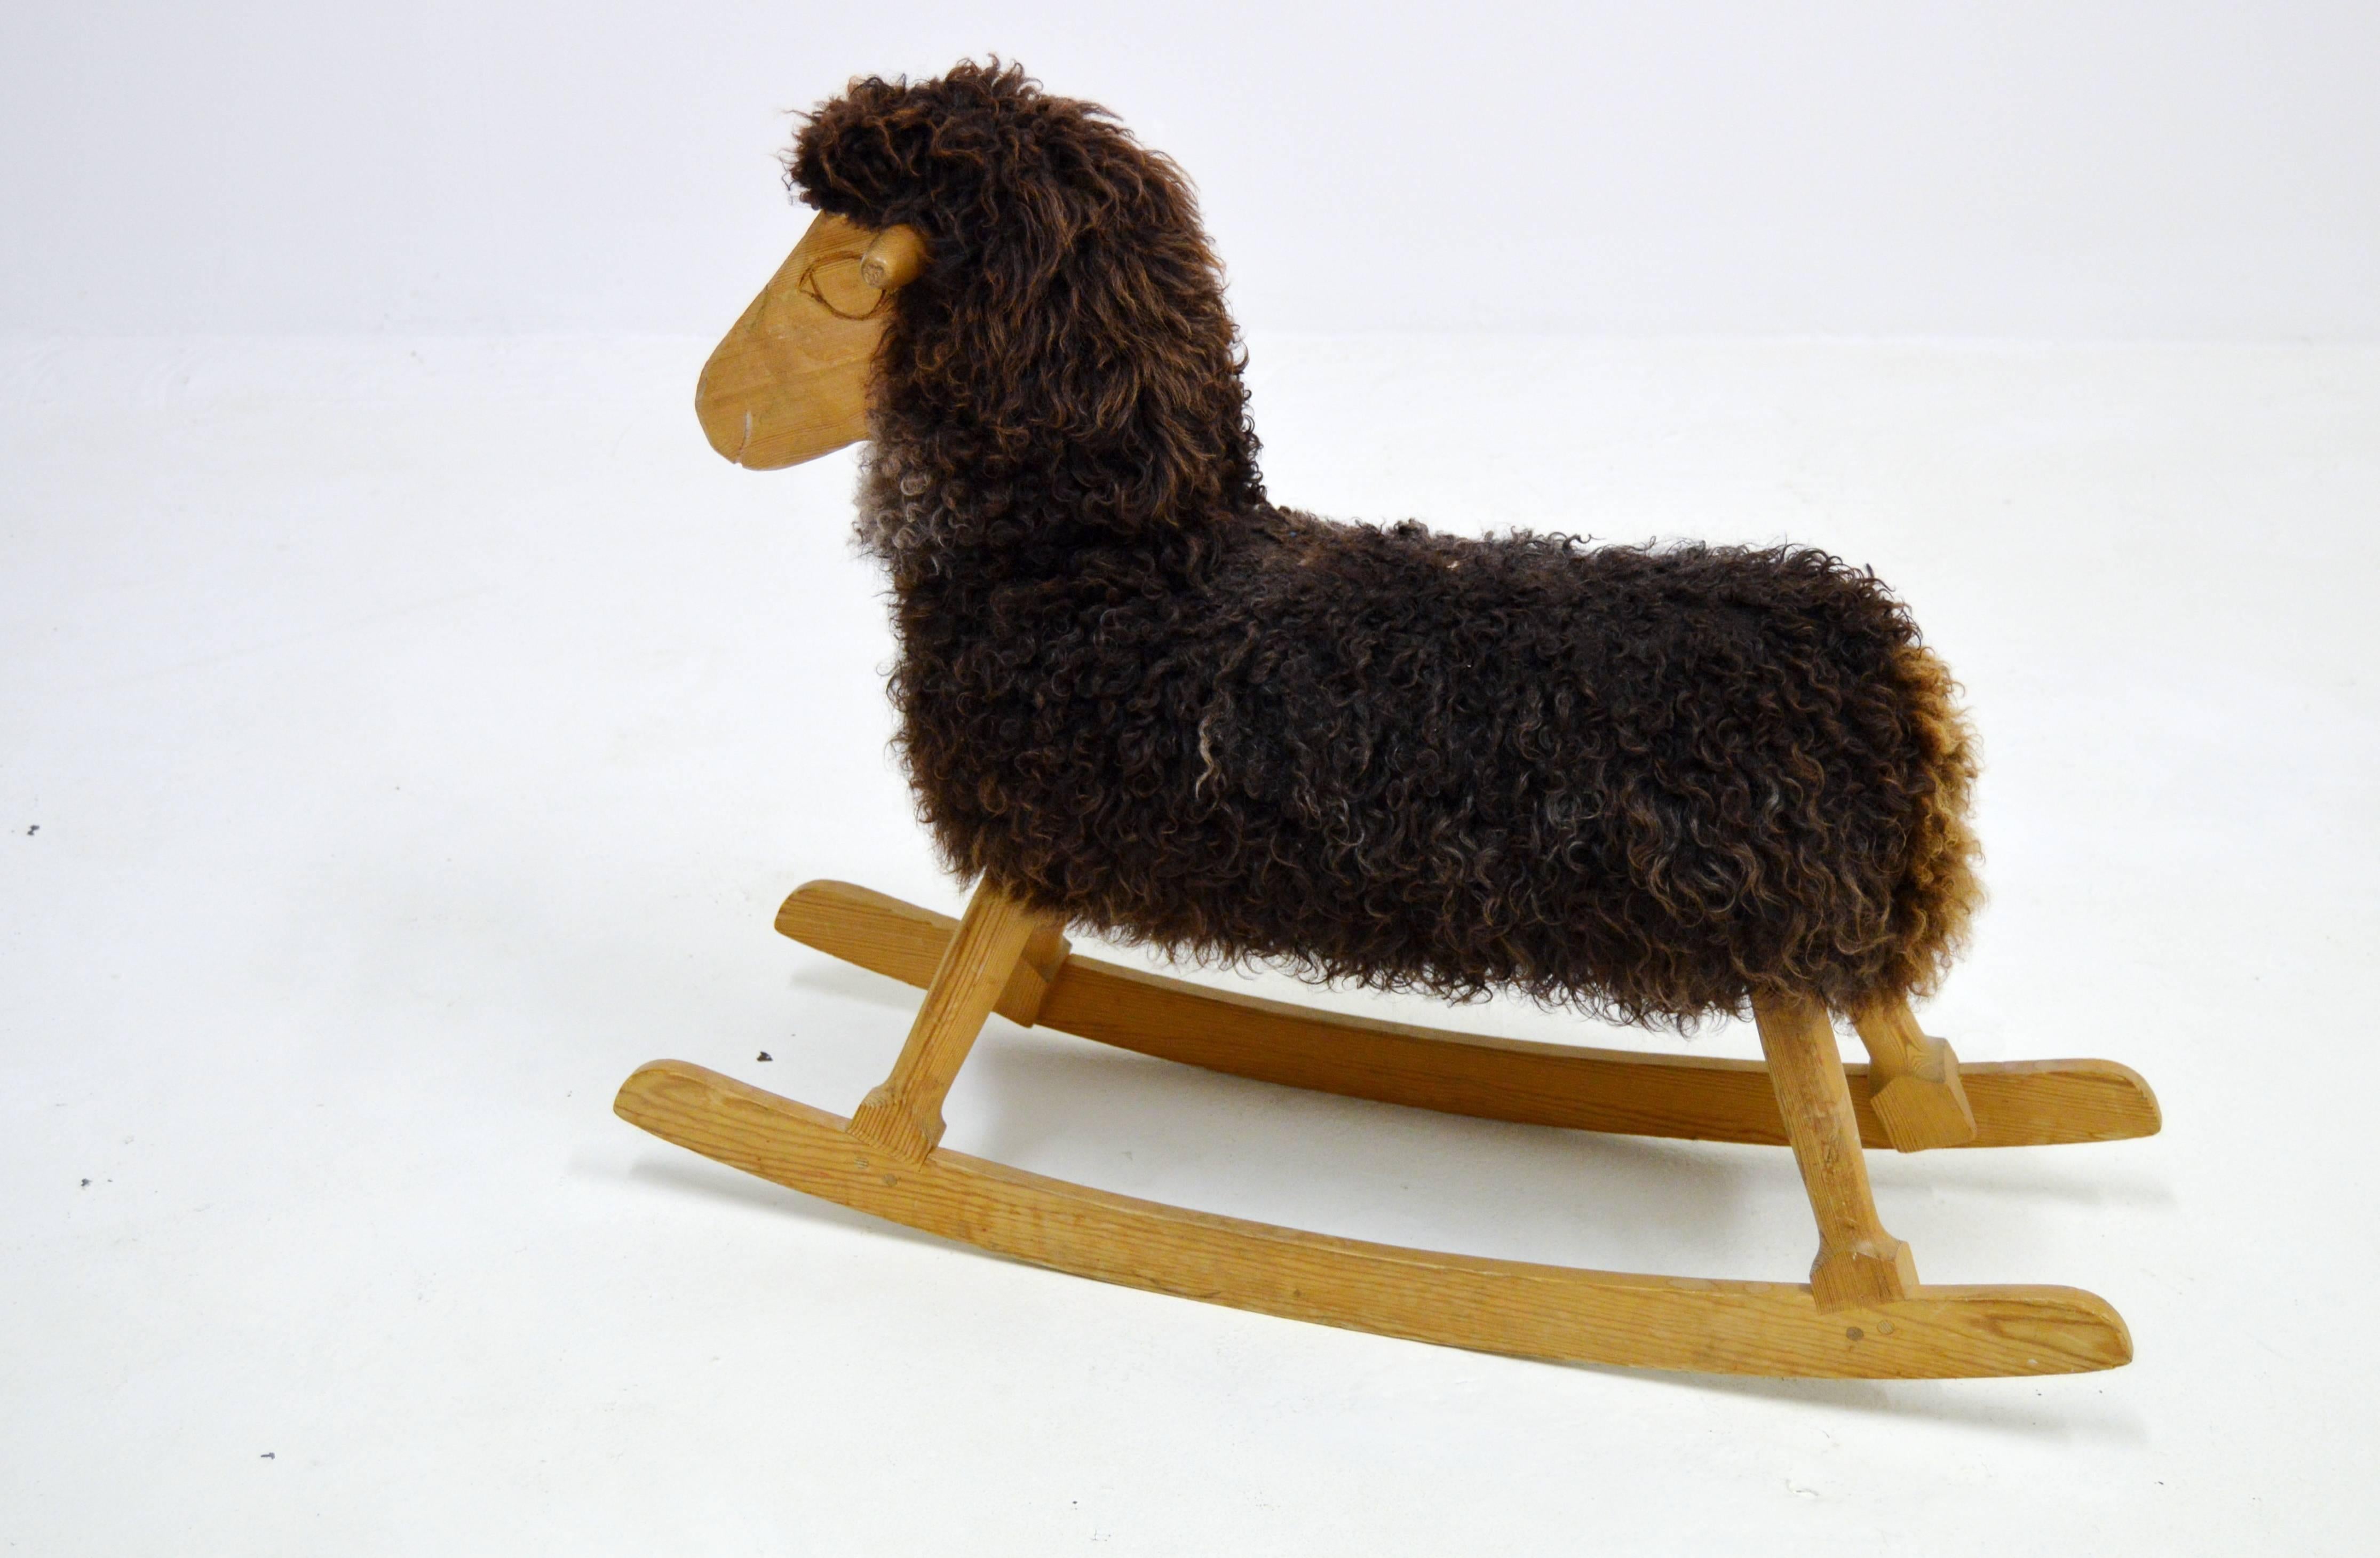 Povl Kjær designed the first rocking sheep in 1981 for his niece. He thought he could make more and sell them, so therefor, a limited edition was made at first, since he did them all by hand.
This sheep is one of the first and has been in one and